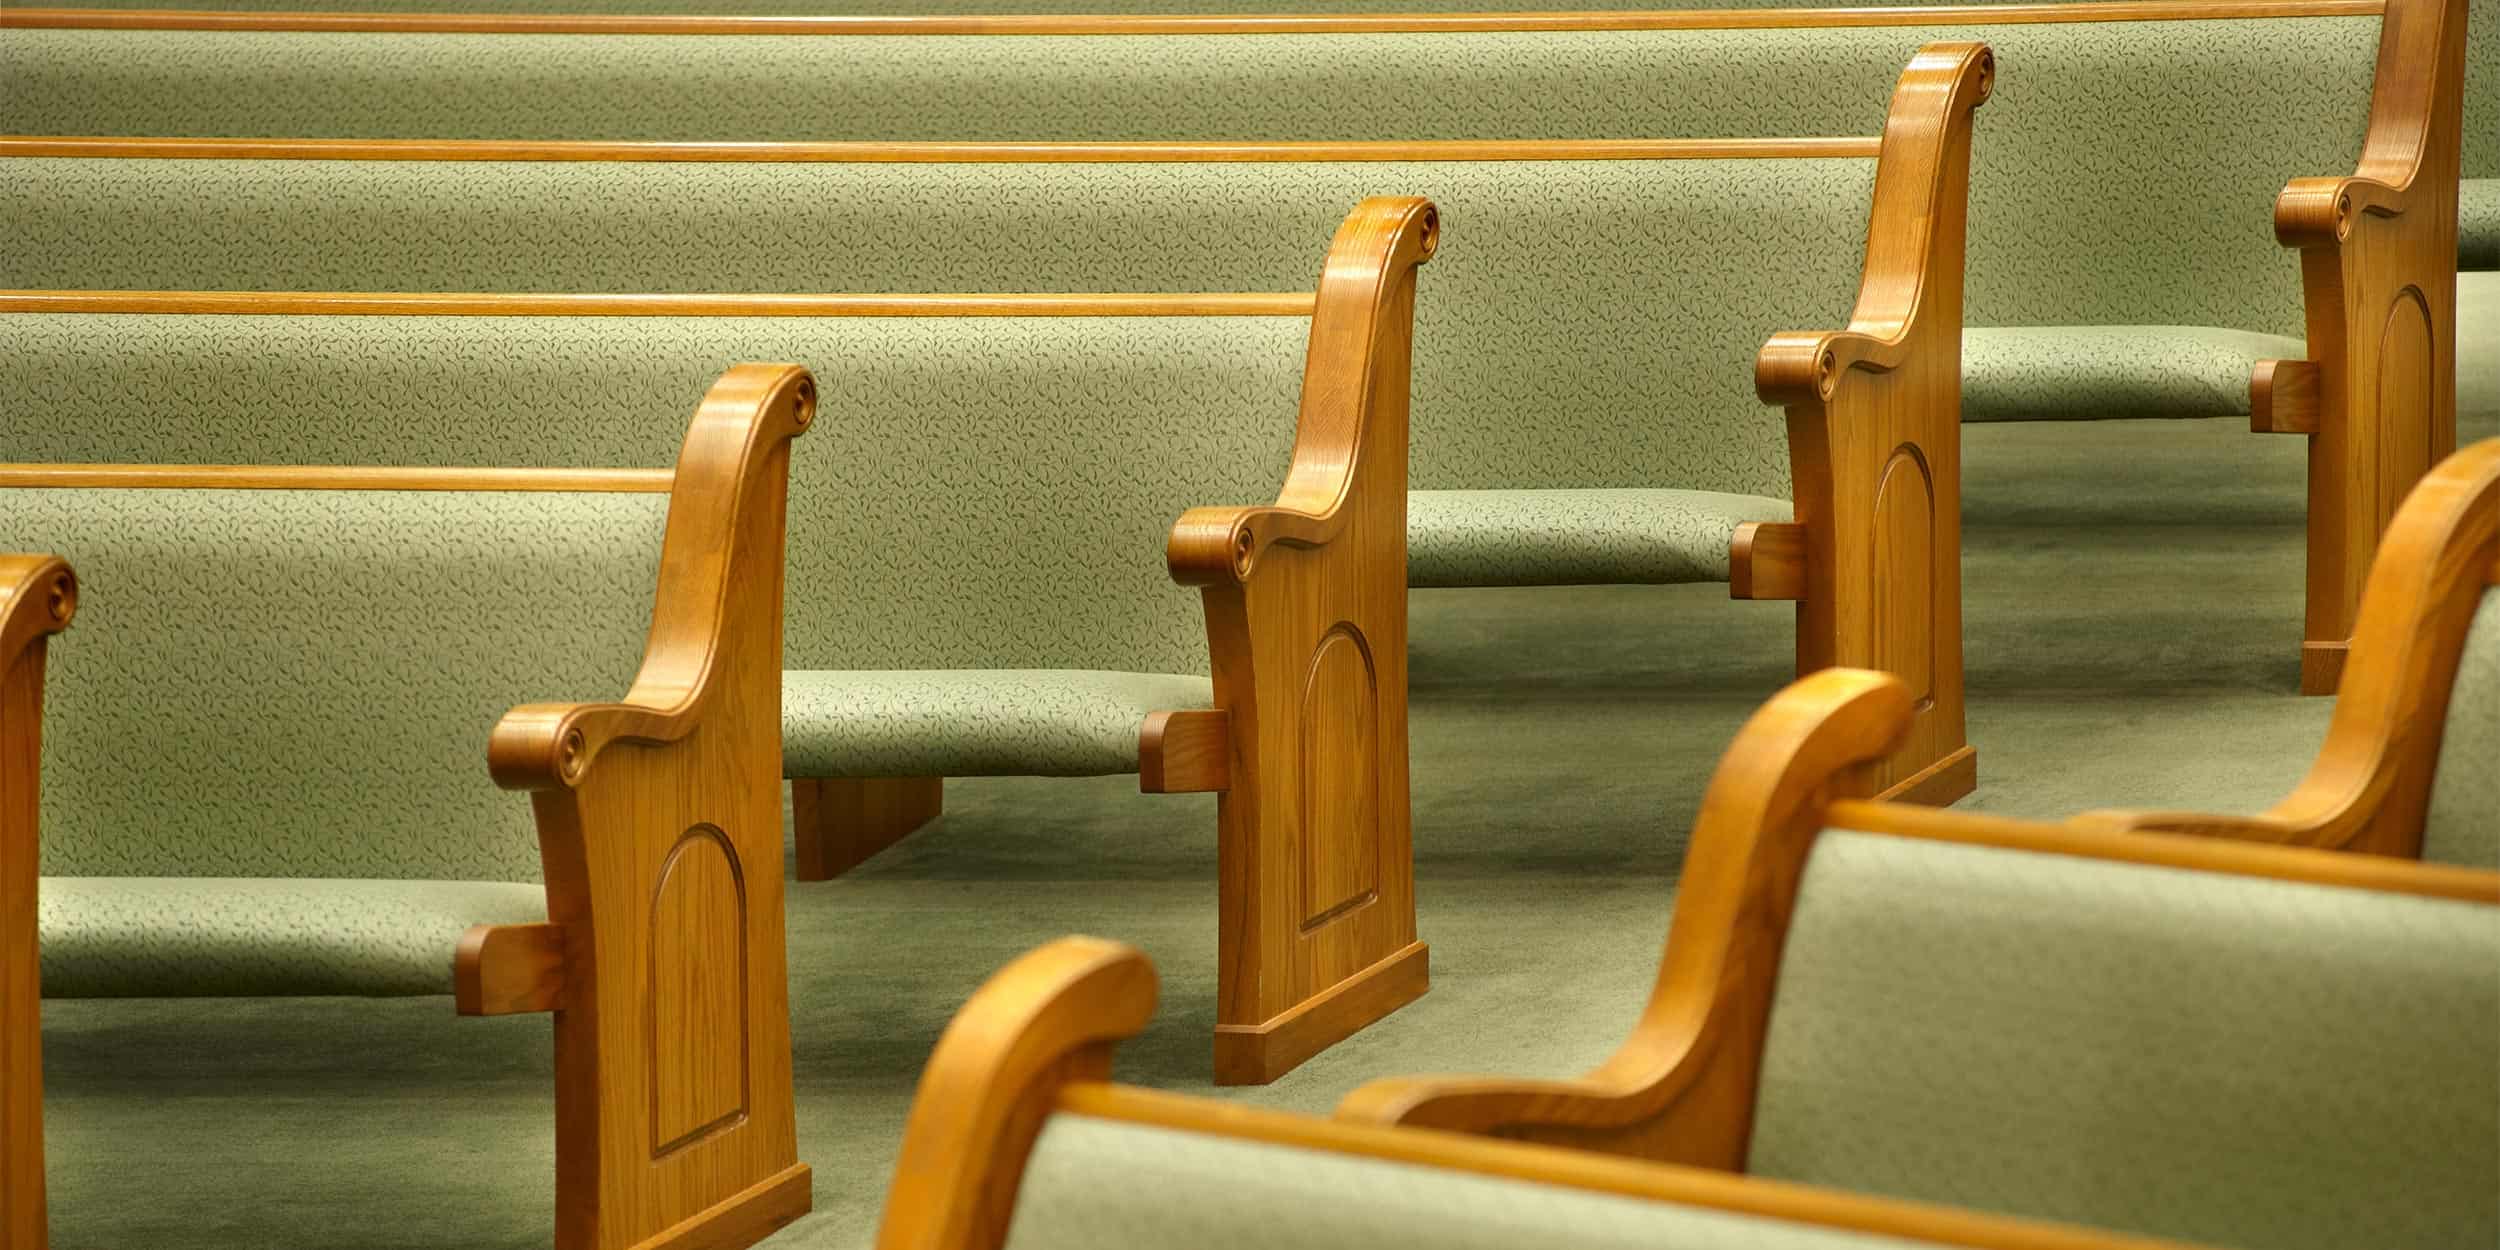 Close up of fully upholstered Sauder pews in First Baptist Church located in Marion, Illinois